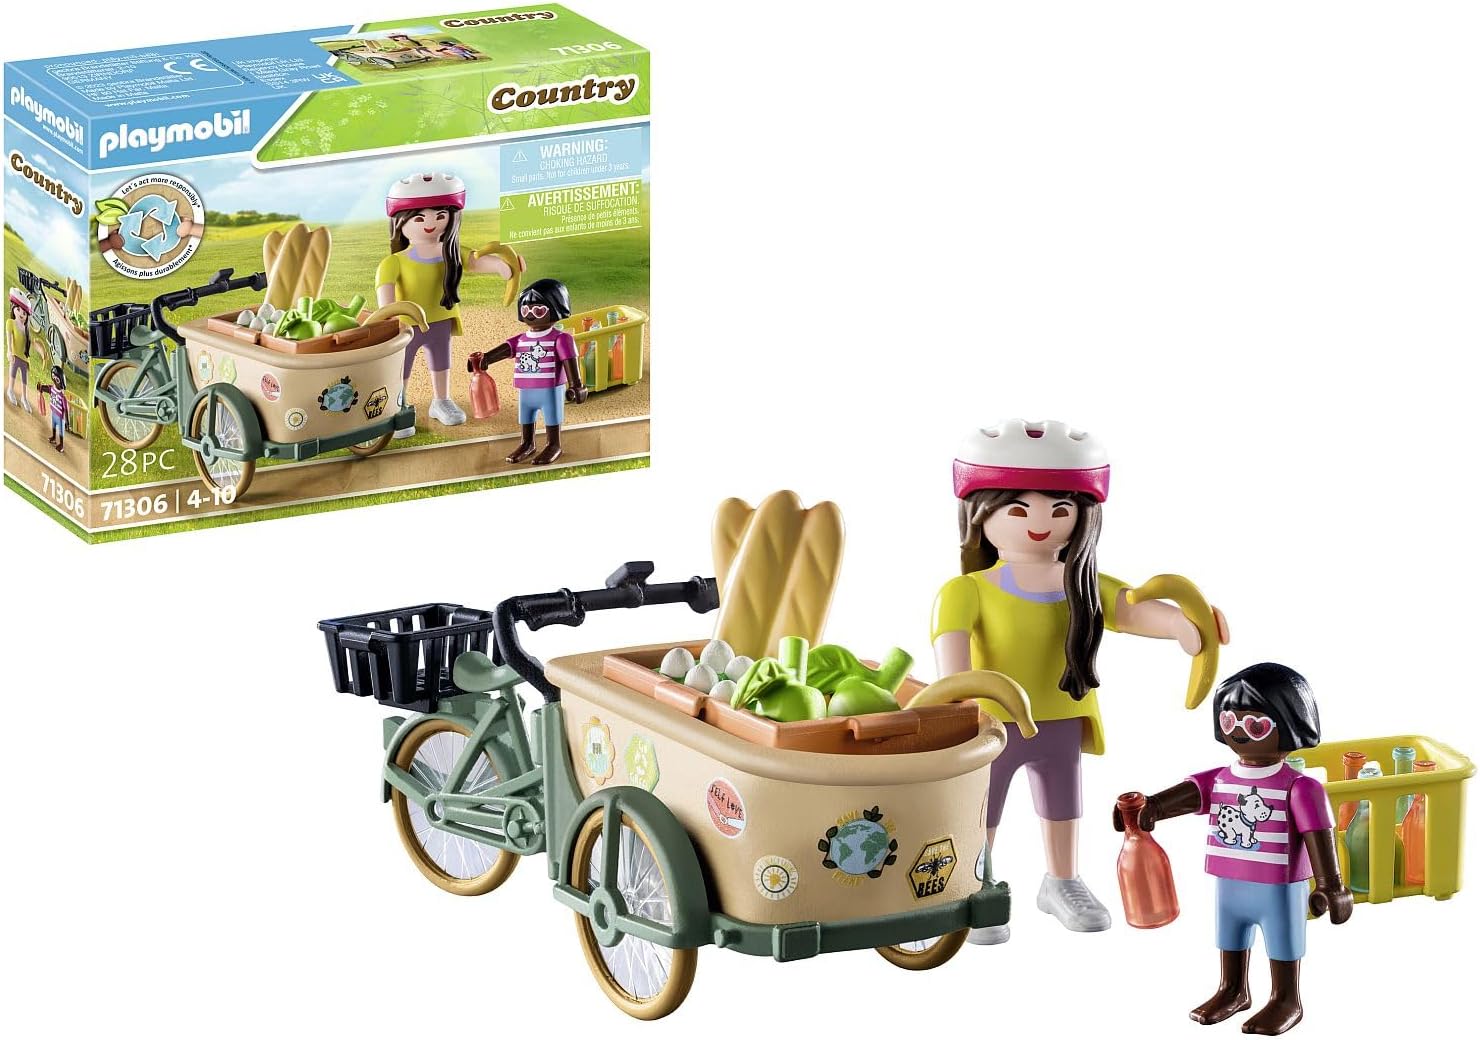 PLAYMOBIL Country 71306 Cargo Bike, Practical and Environmentally Friendly Transport, Convenient Transport of Shopping and Exciting Adventures, Toy for Children from 4 Years